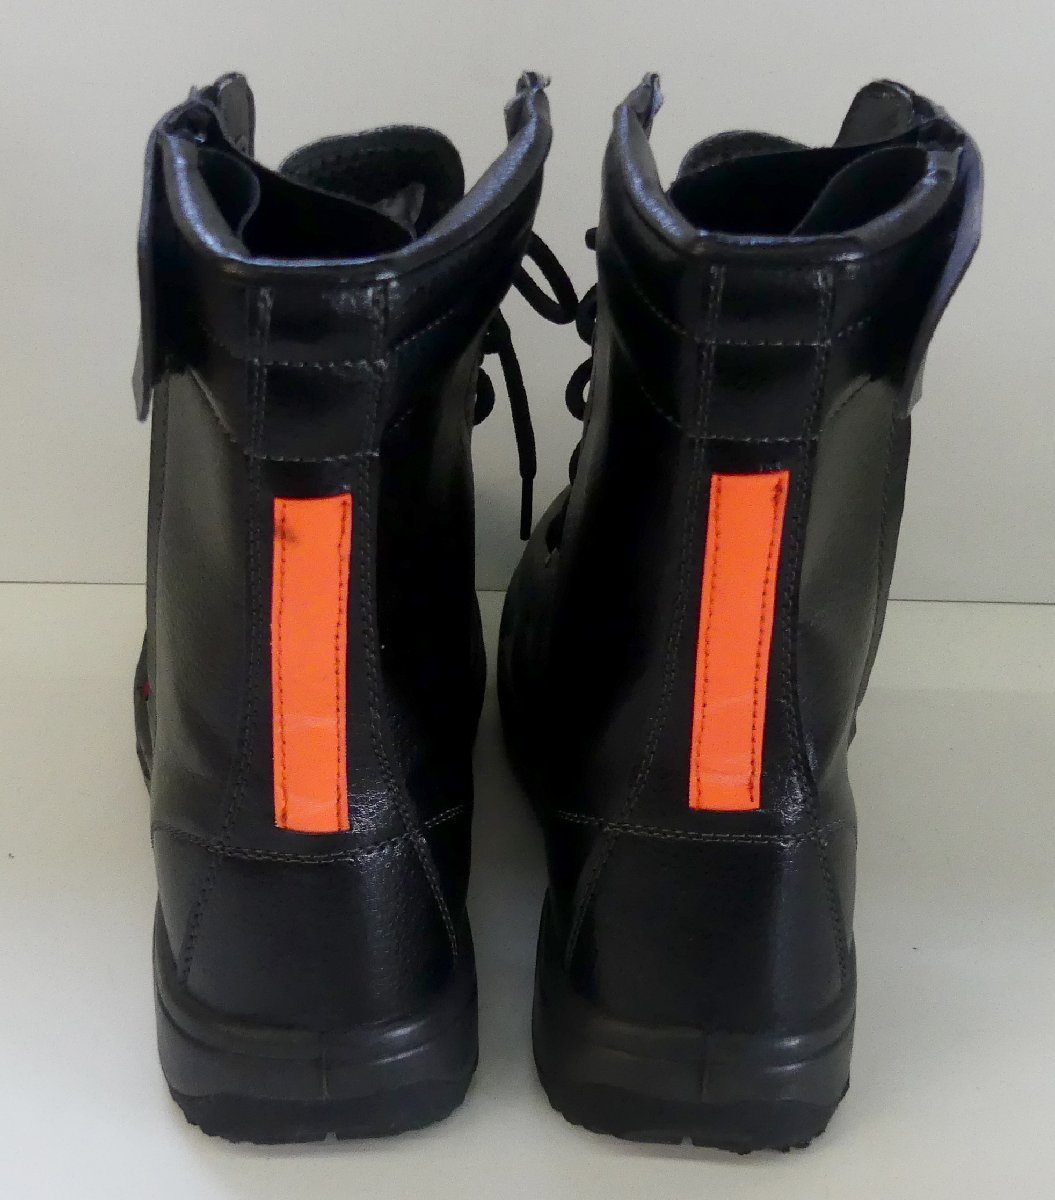 * beautiful goods!AITOZ I tos fire fighting shoes / safety shoes [59824-010] black color 25cm*